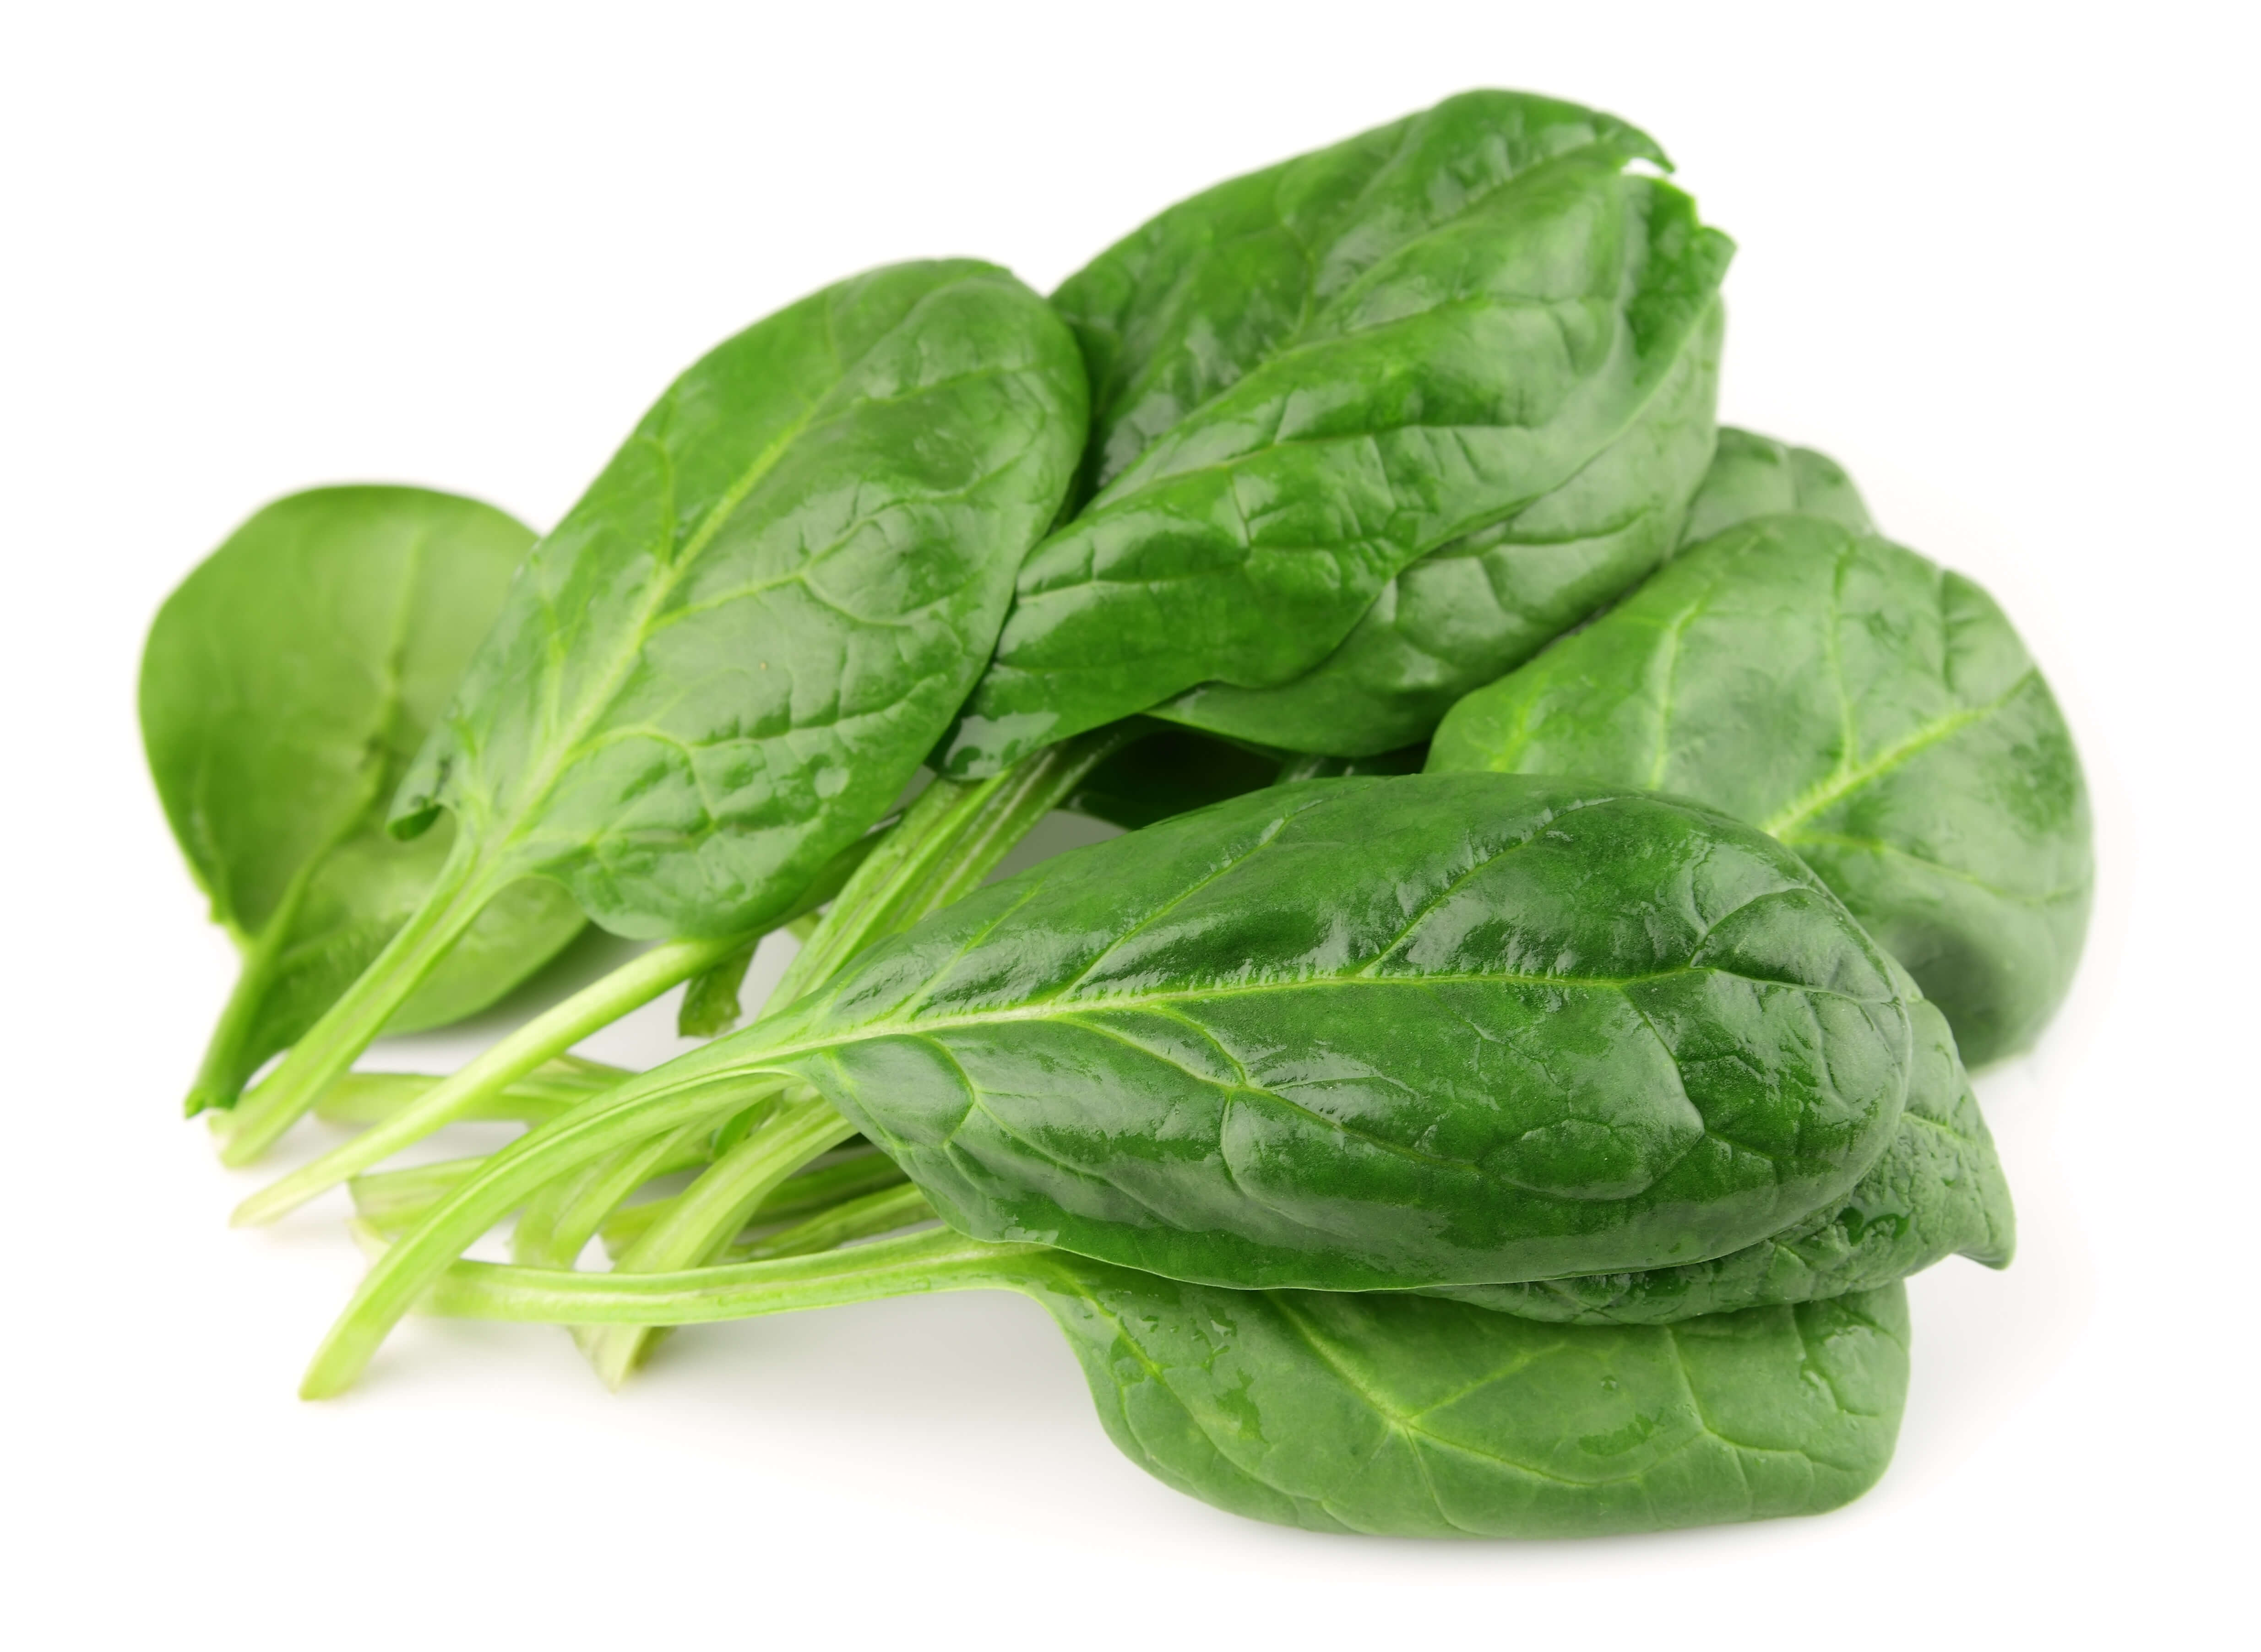 b vitamins in spinach will calm hyperactive dogs